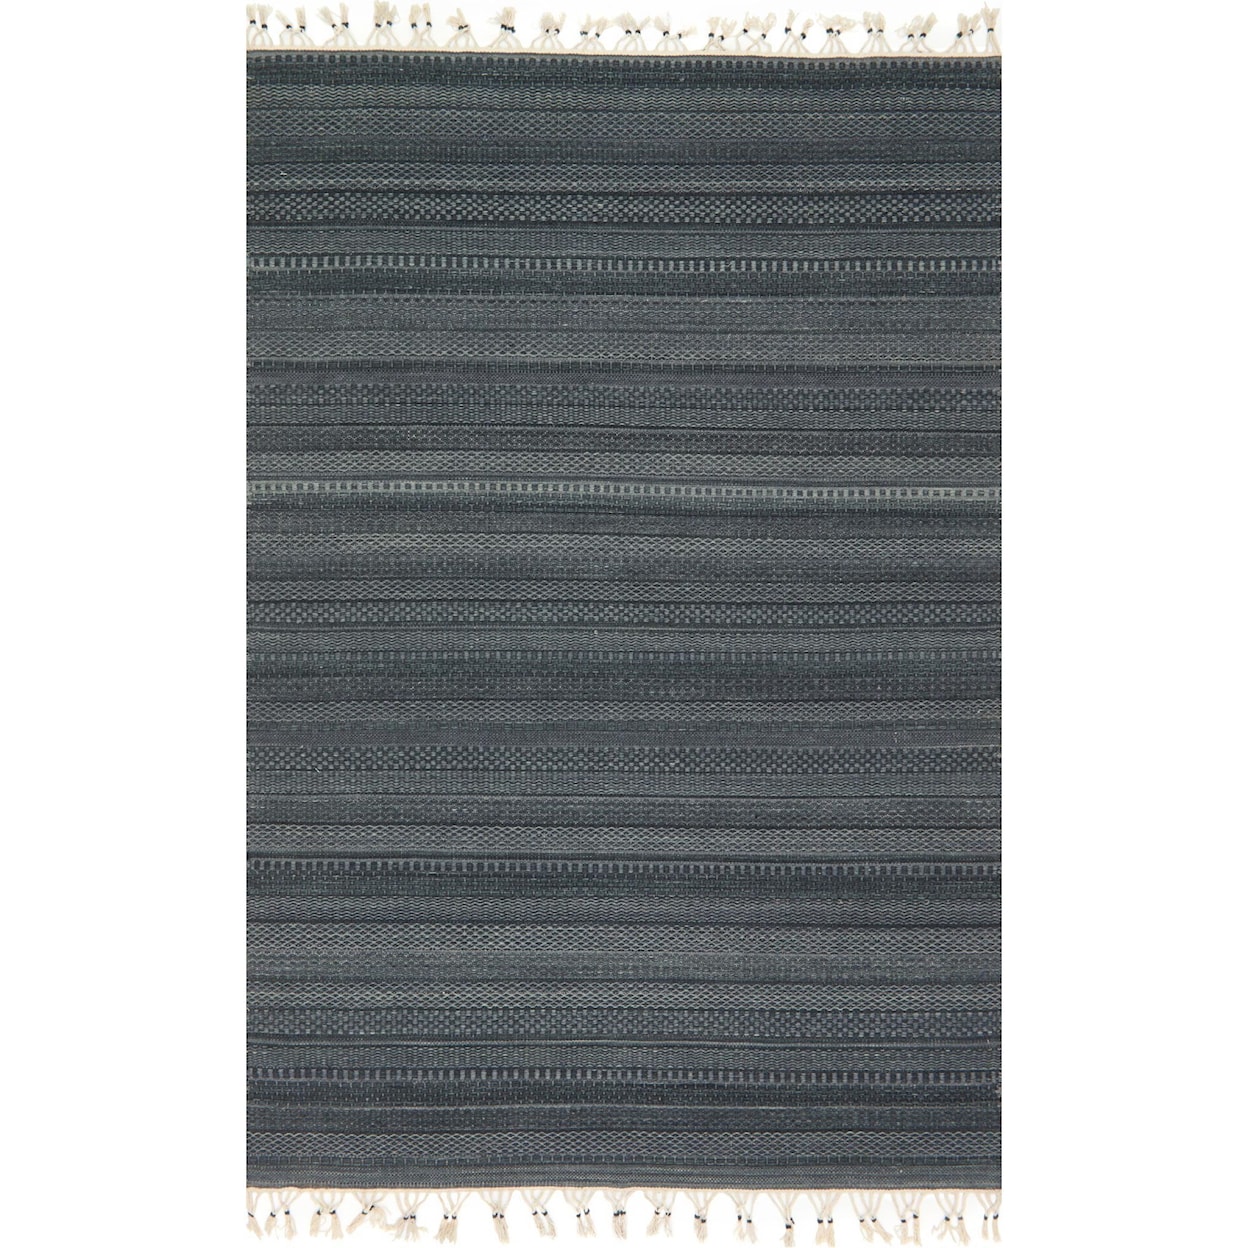 Magnolia Home by Joanna Gaines for Loloi Mikey 5' 0" x 7' 6" Rectangle Rug